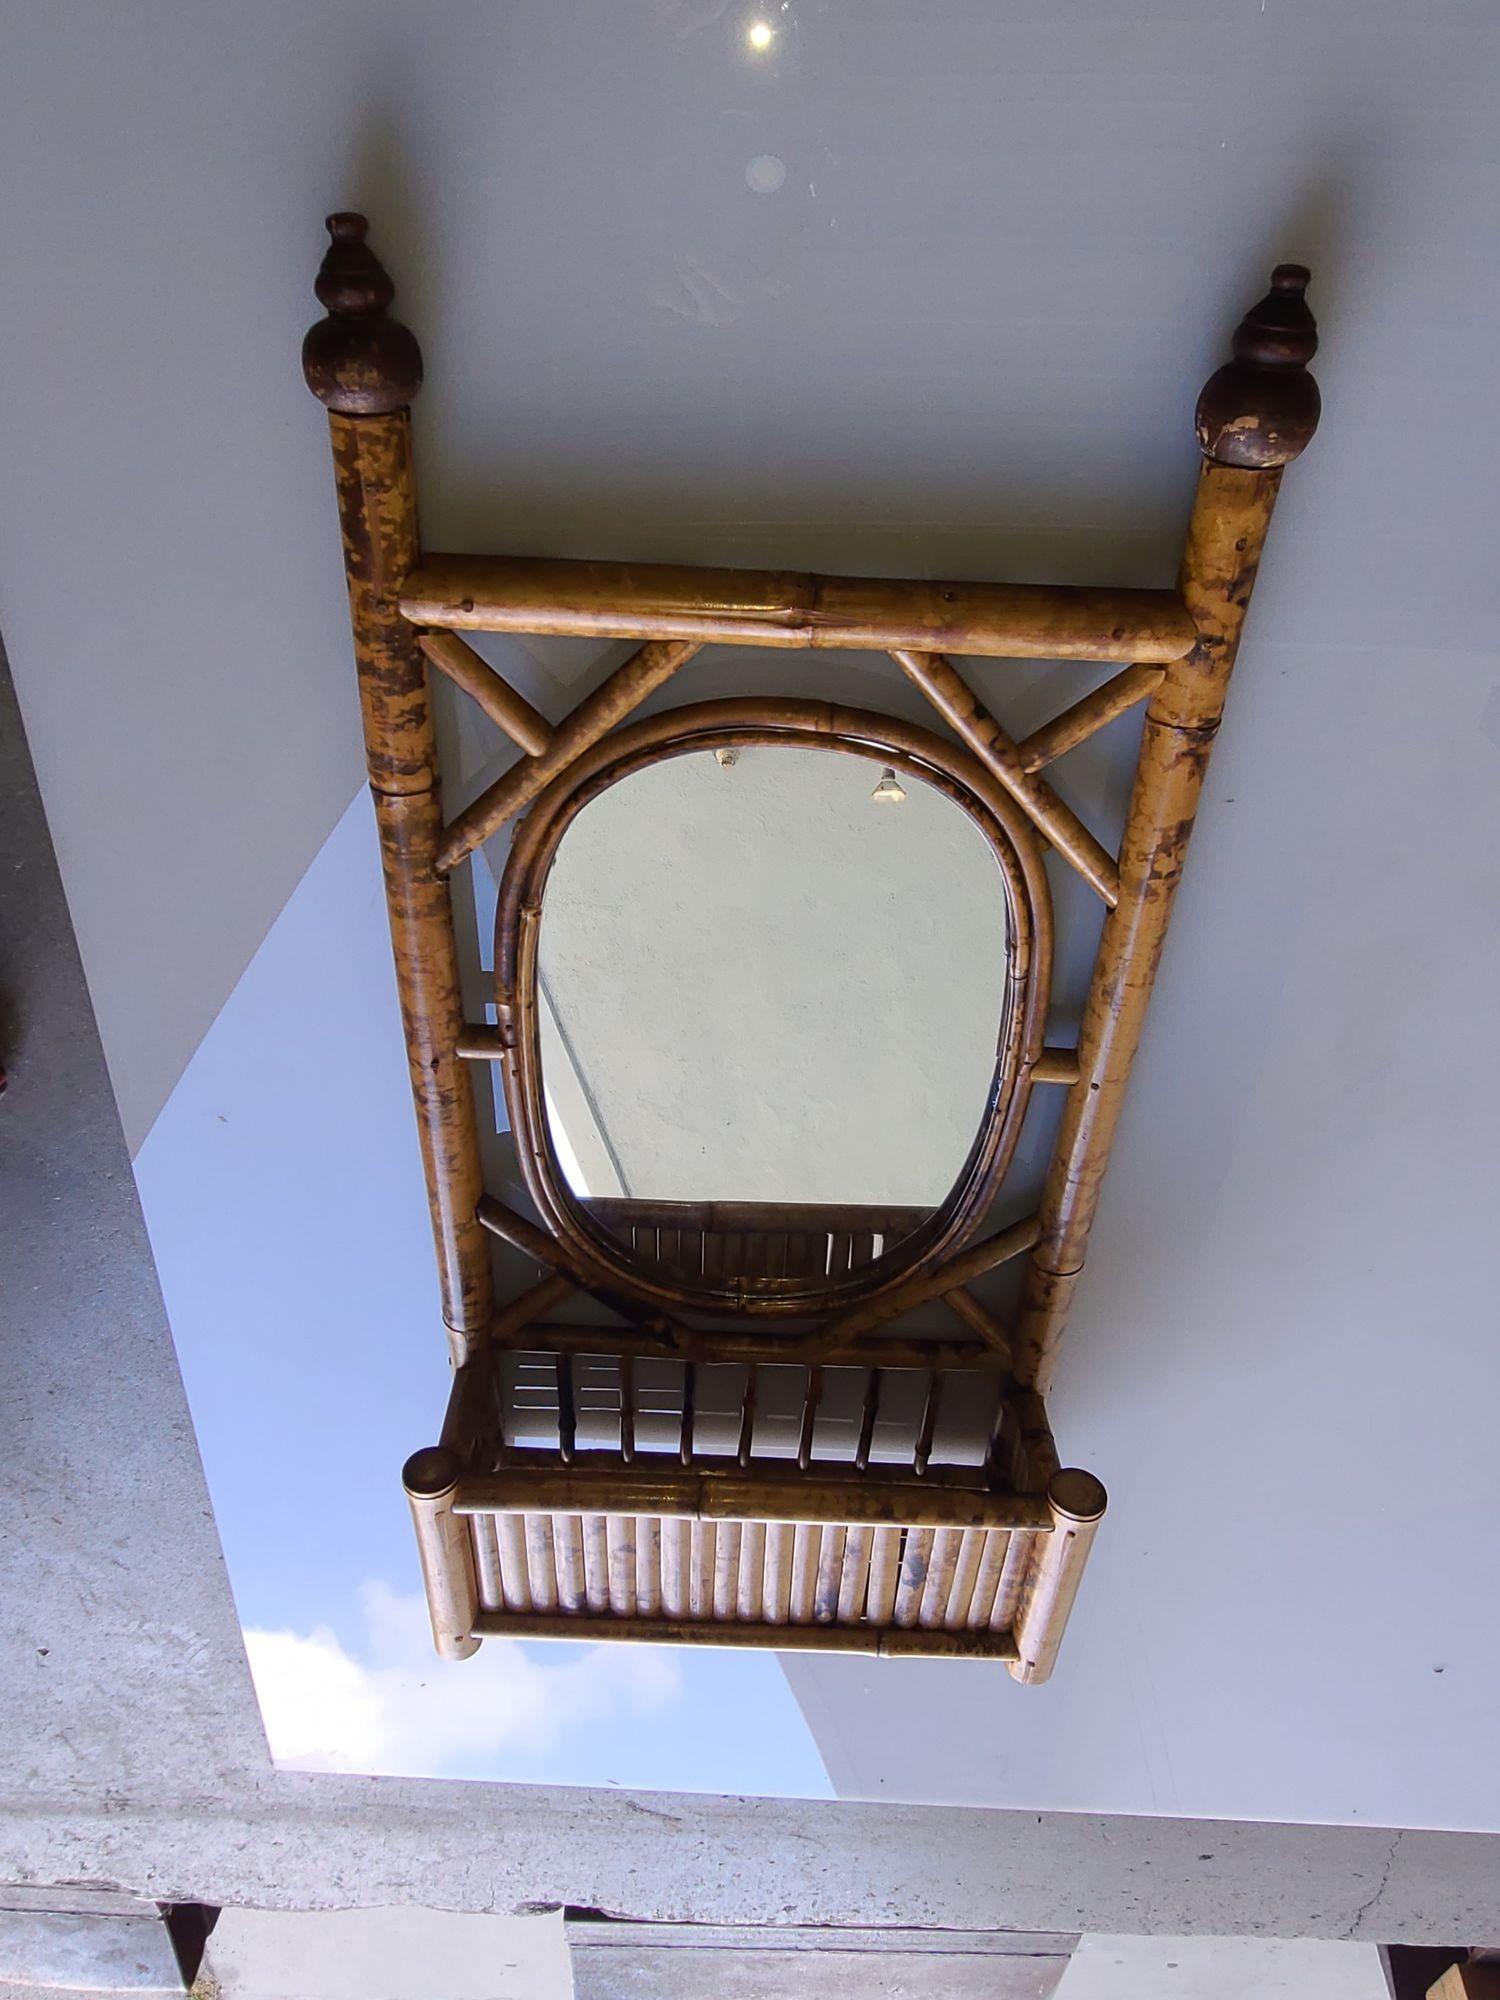 Antique 1900 Aesthetical Movement tiger bamboo wall mirror with holder. The mirror features an oval-shaped frame fixed to a frame that ends at two pinnacles. Along the bottom is a small holder for personal effects.

Mirror Dimensions: 13